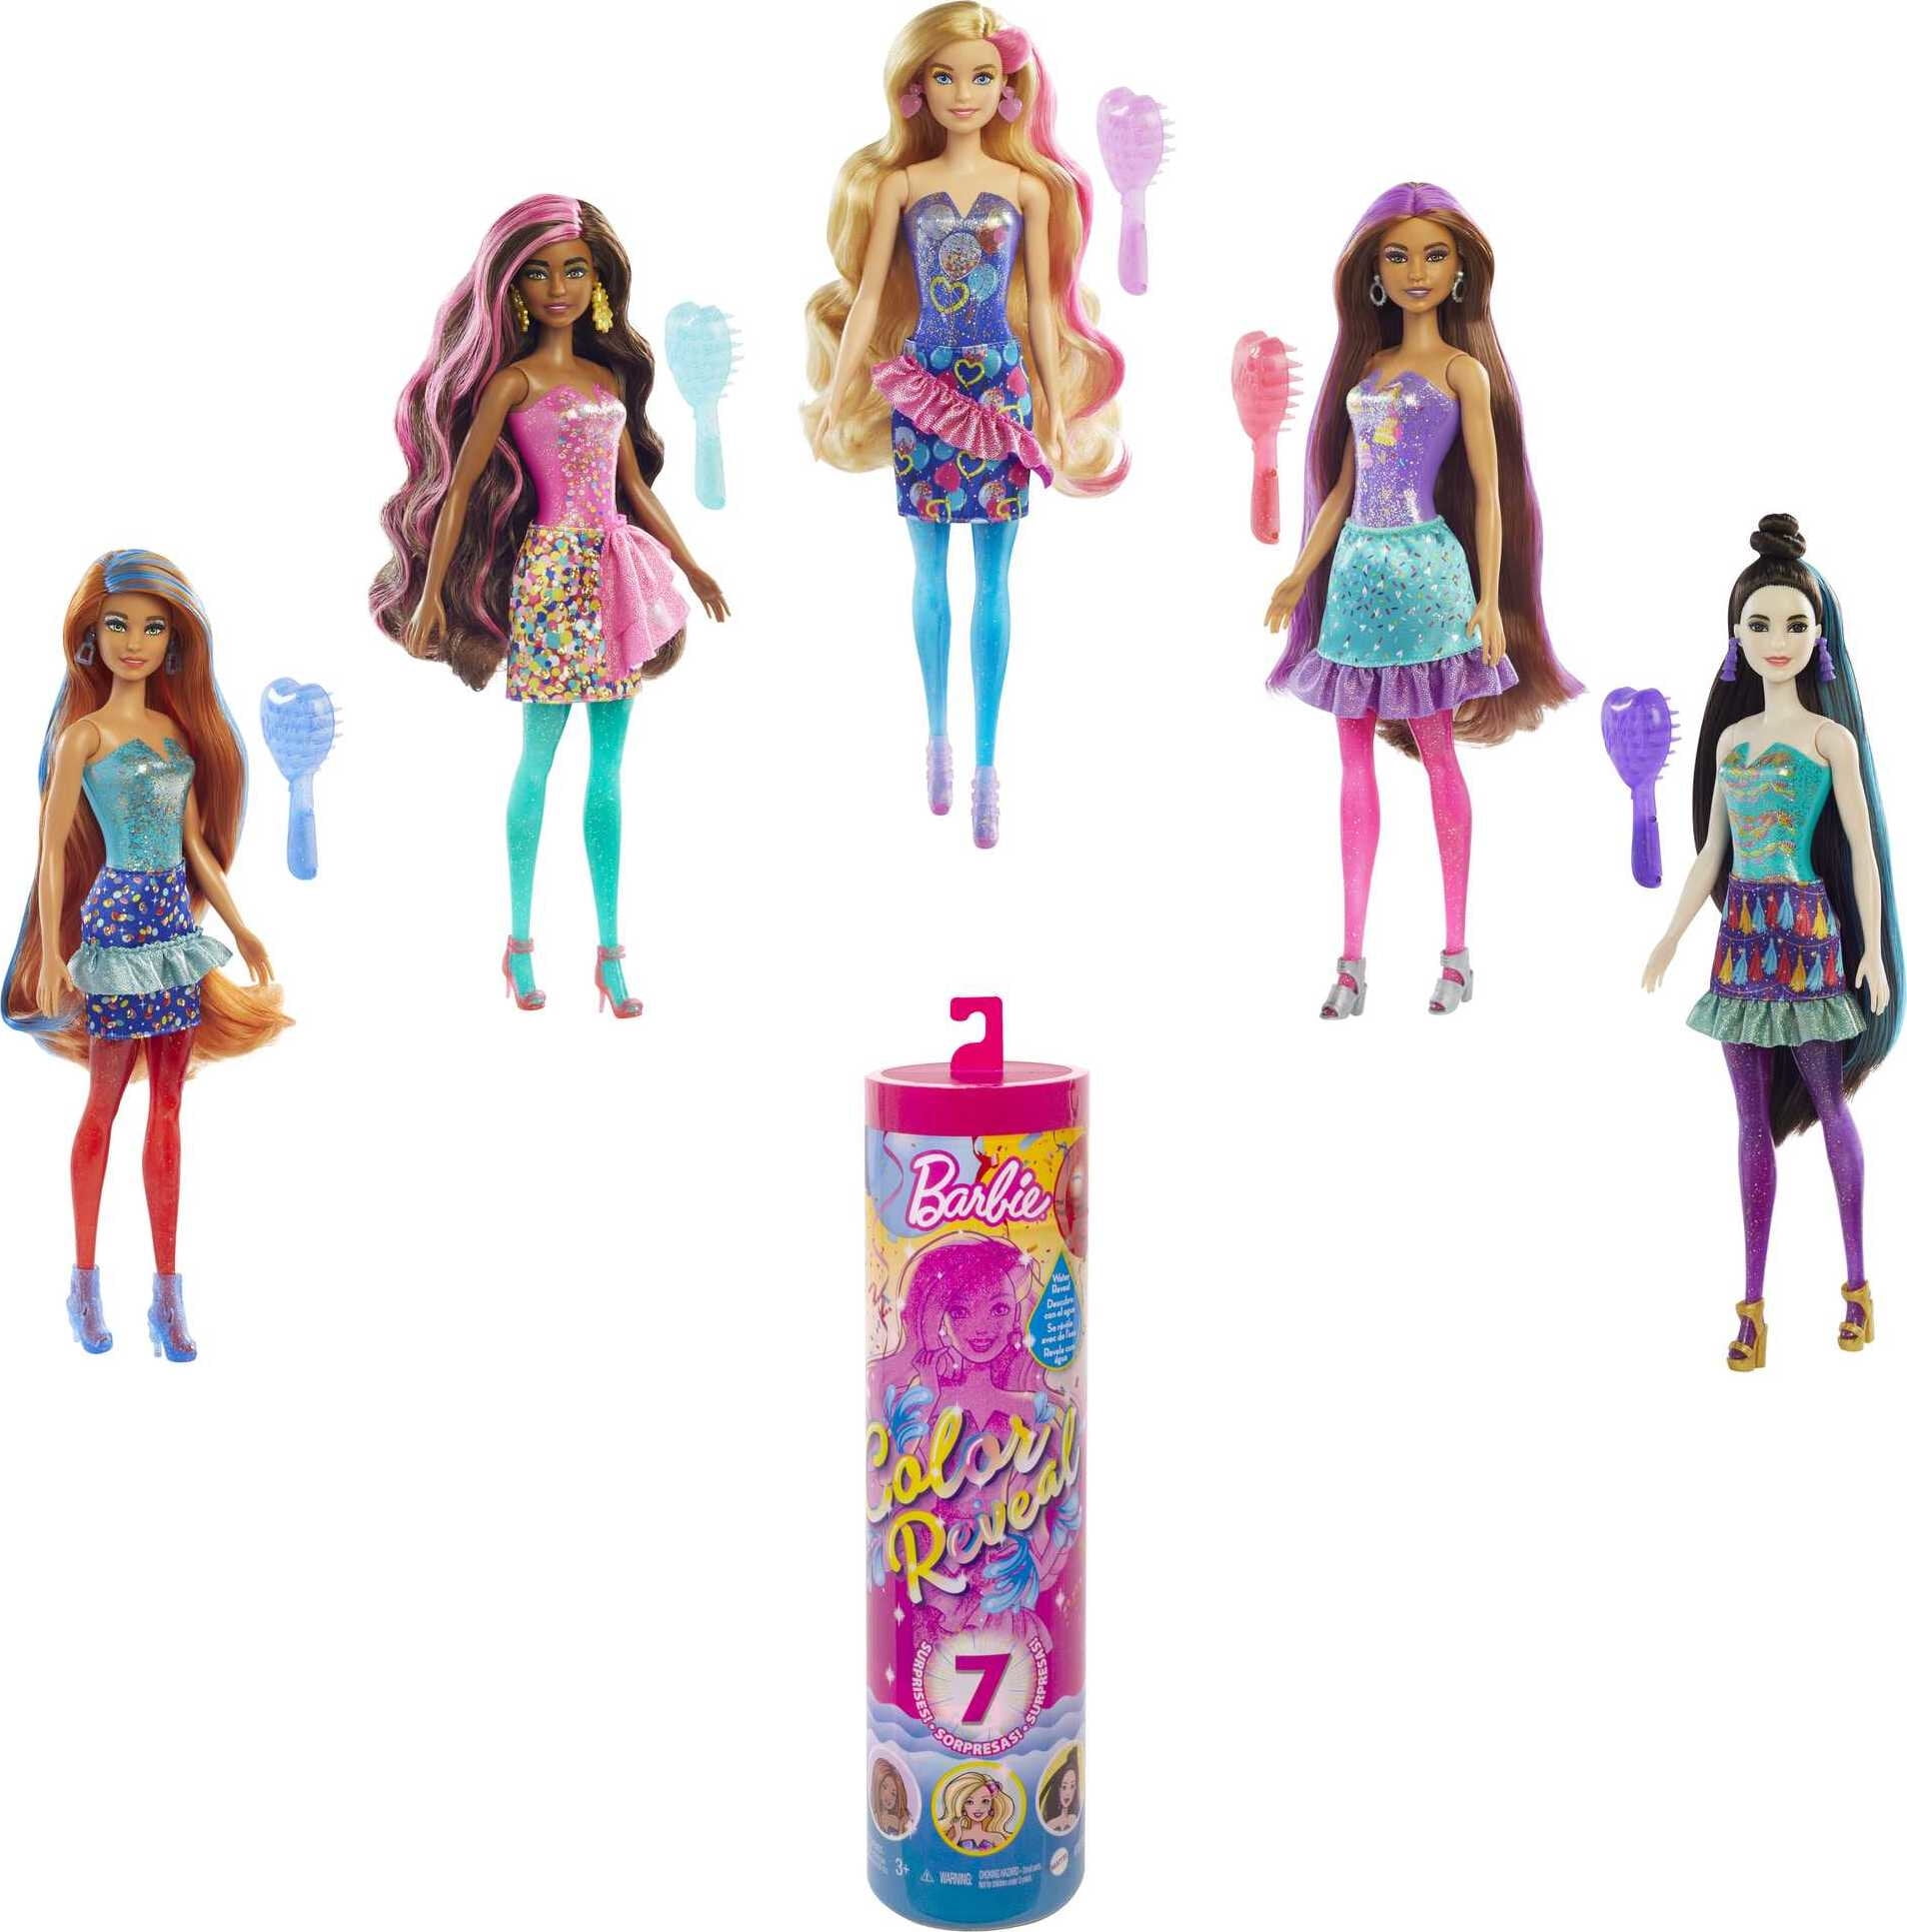 Barbie Color Reveal Mermaid Doll with 7 surprises Assortment NEW 2020 